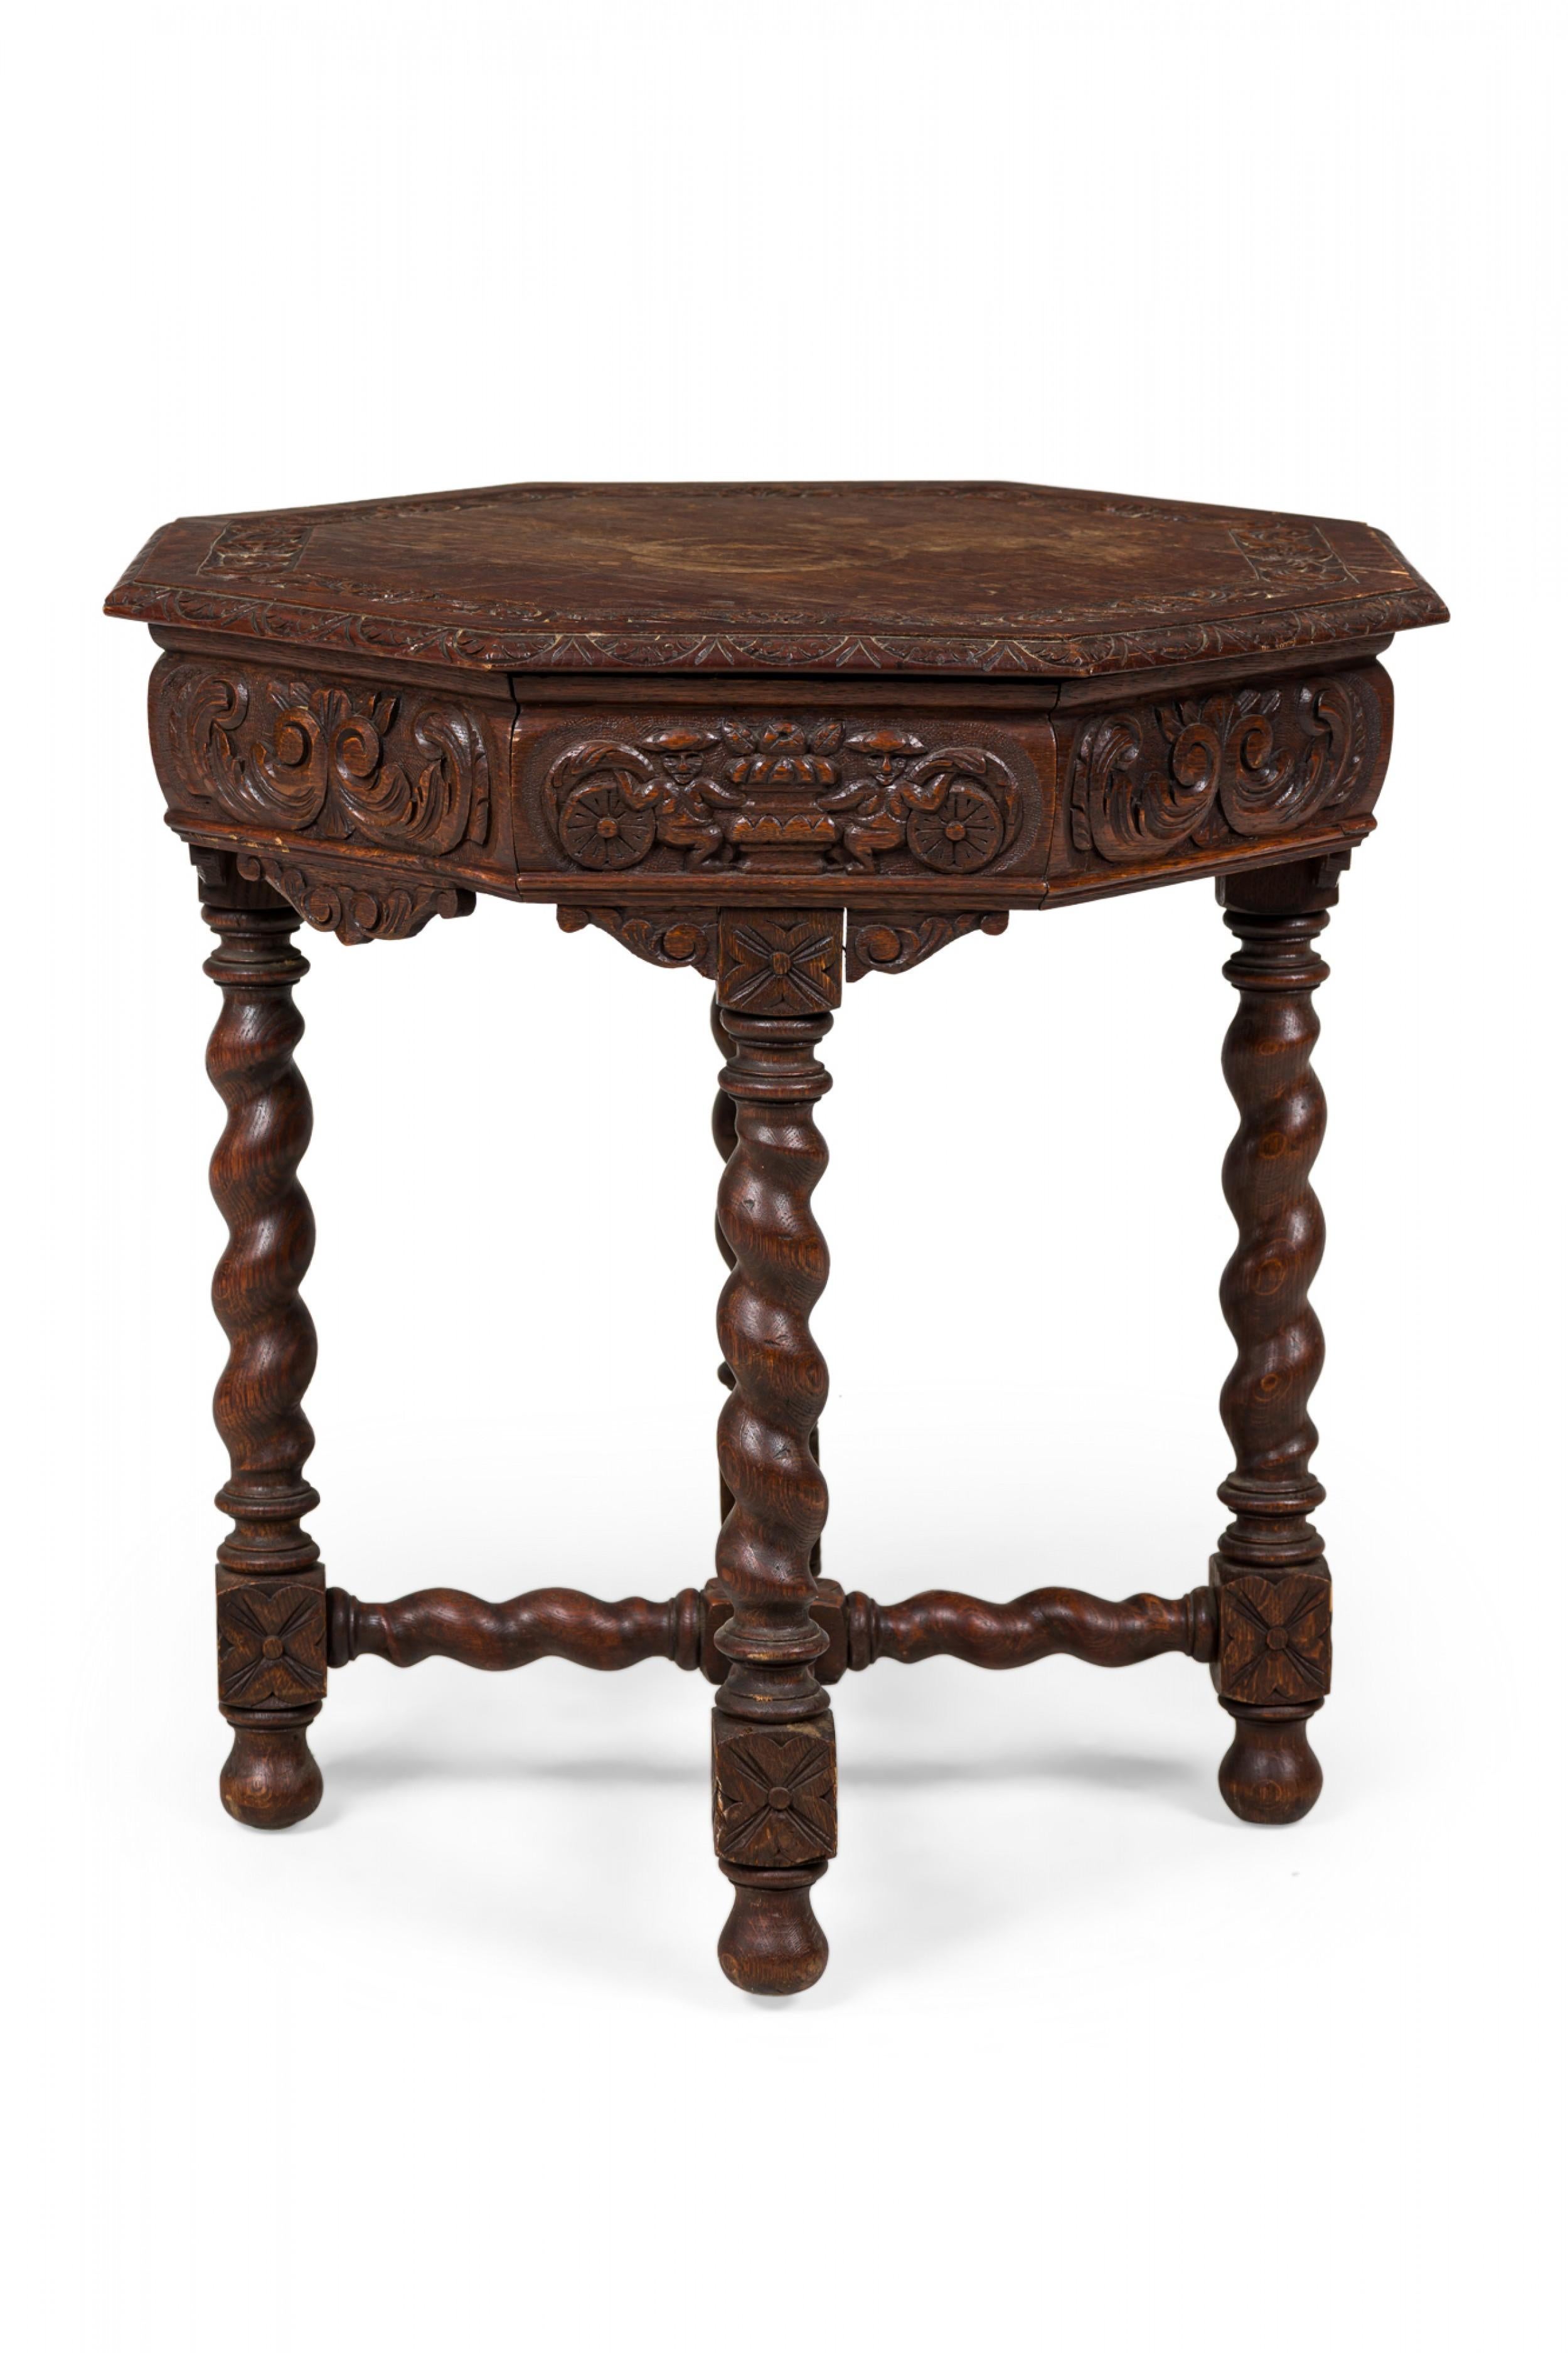 English Jacobean-style carved oak occasional / side table with an octagonal top with carved inlay and apron, resting on four spiral turned legs joined by a spiral turned x-stretcher and resting on carved ball feet.